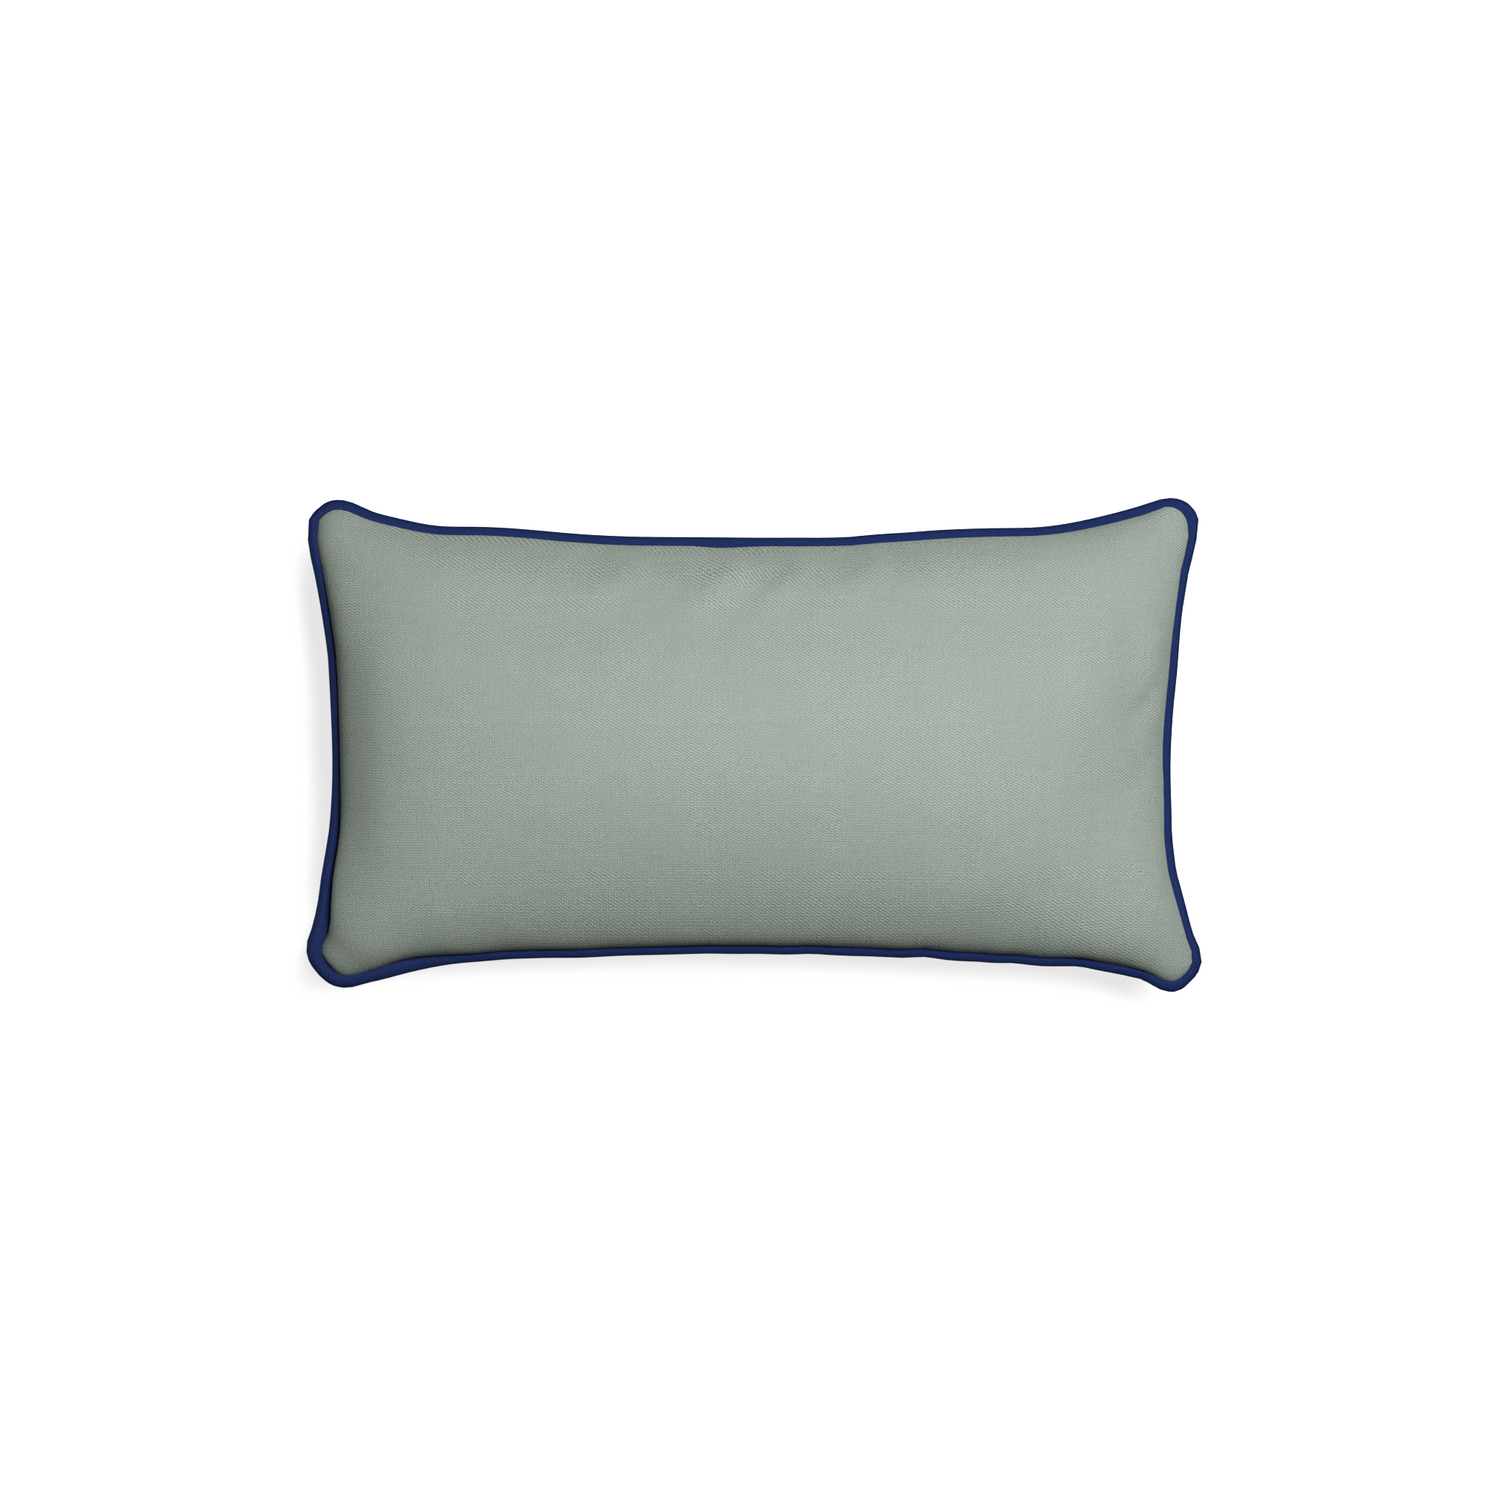 Petite-lumbar sage custom sage green cottonpillow with midnight piping on white background